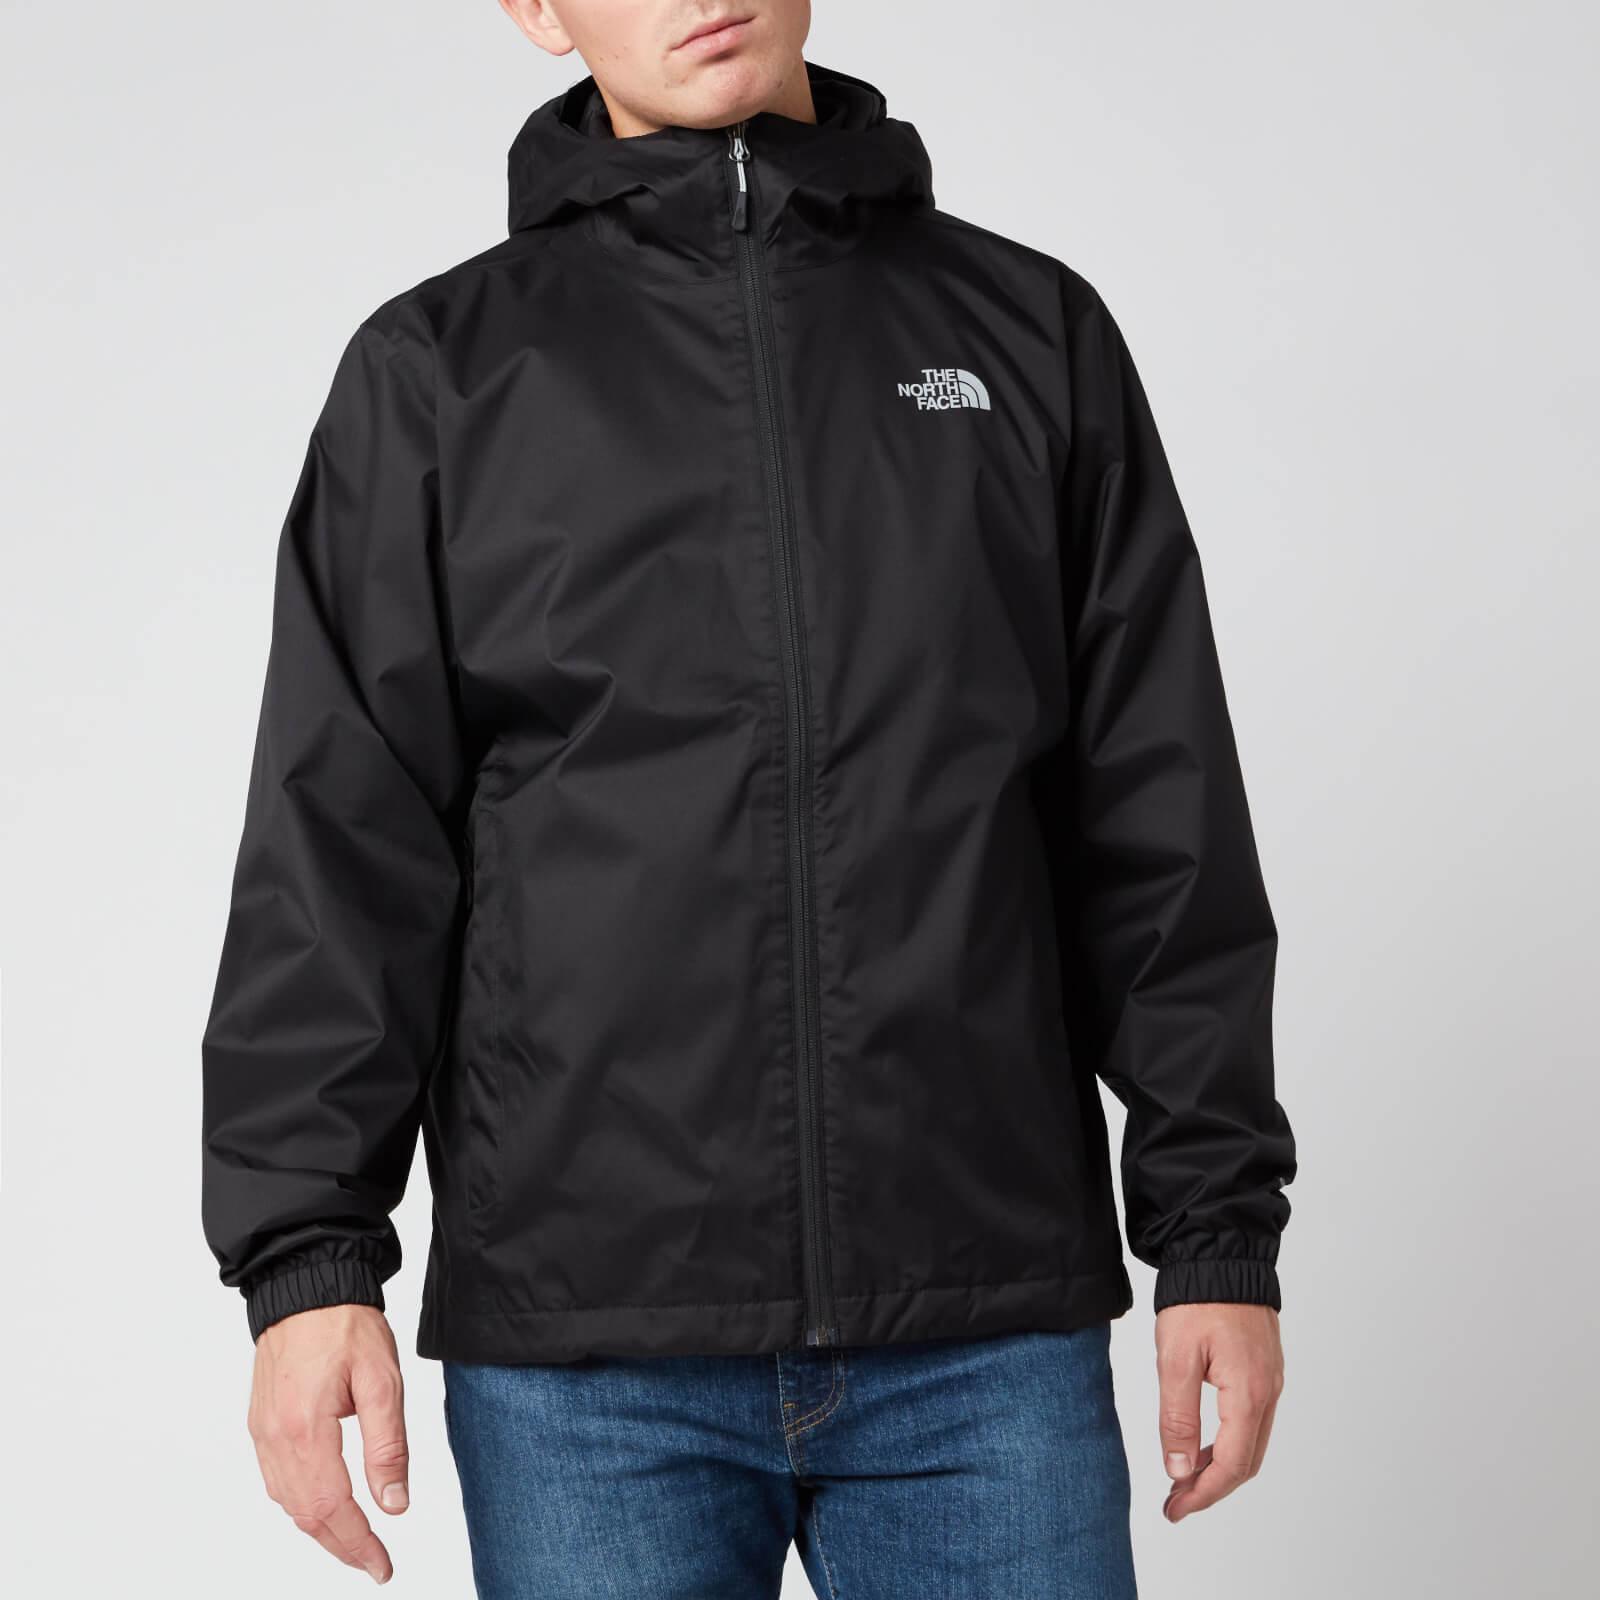 The North Face Quest Jacket Hot Sale, 53% OFF | www.ingeniovirtual.com